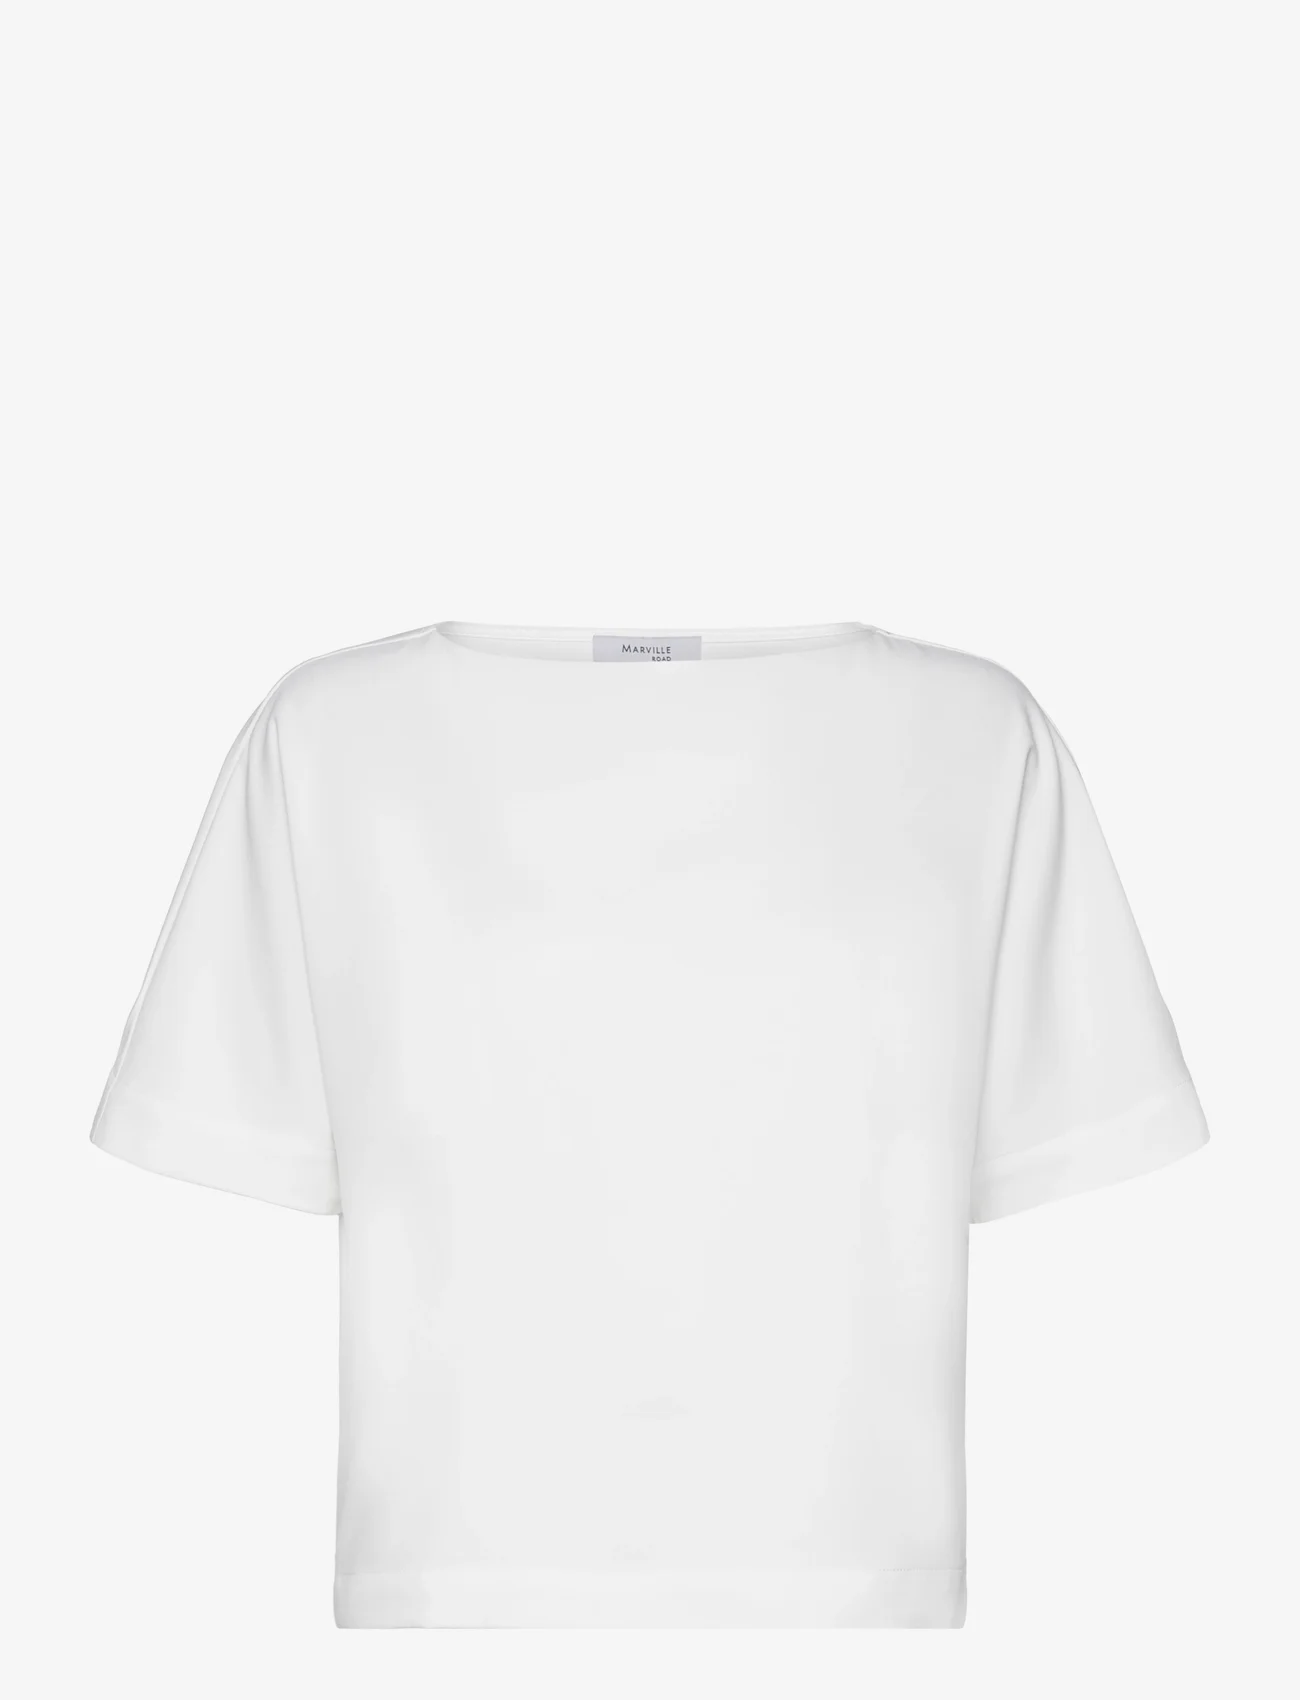 Marville Road - Ava Top - short-sleeved blouses - off-white - 0